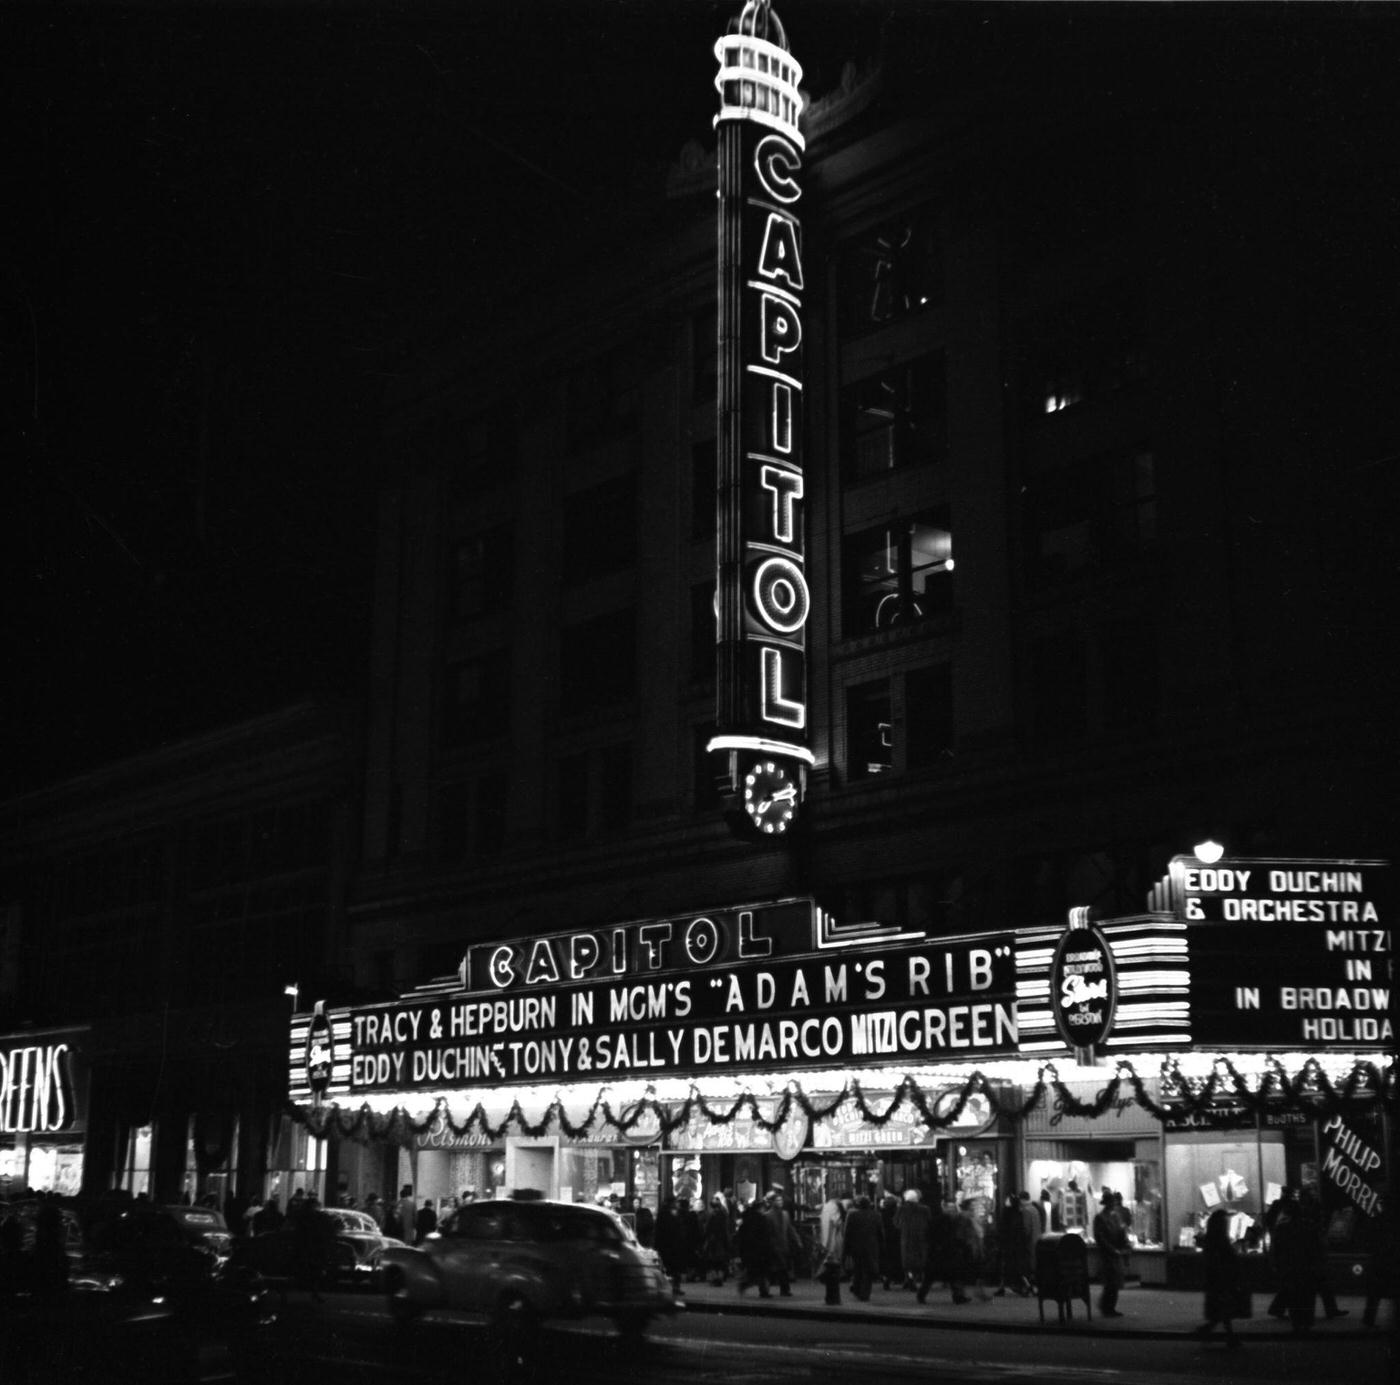 Capitol Theater Marquee On Broadway Reads &Amp;Quot;Tracy And Hepburn In Mgm'S 'Adam'S Rib'&Amp;Quot;, Manhattan, 1949.